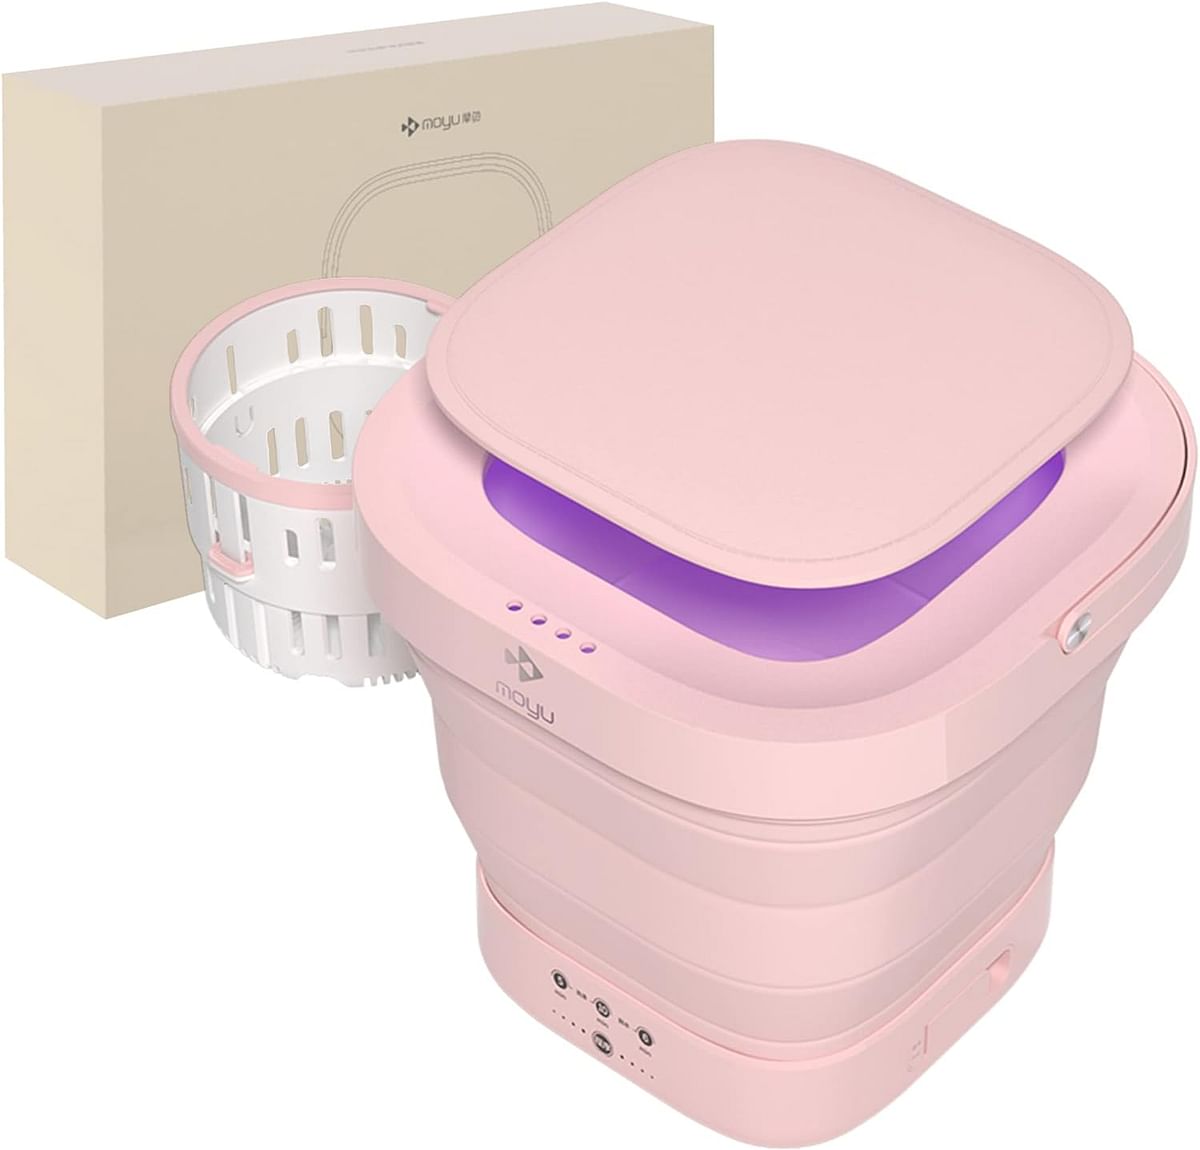 ADITAM 9L Portable Washing Machine - Foldable Mini Washing Machine, Small Portable Washer With Spin Dryer For Underwear Apartment, Camping, RV Travel / Color:Pink